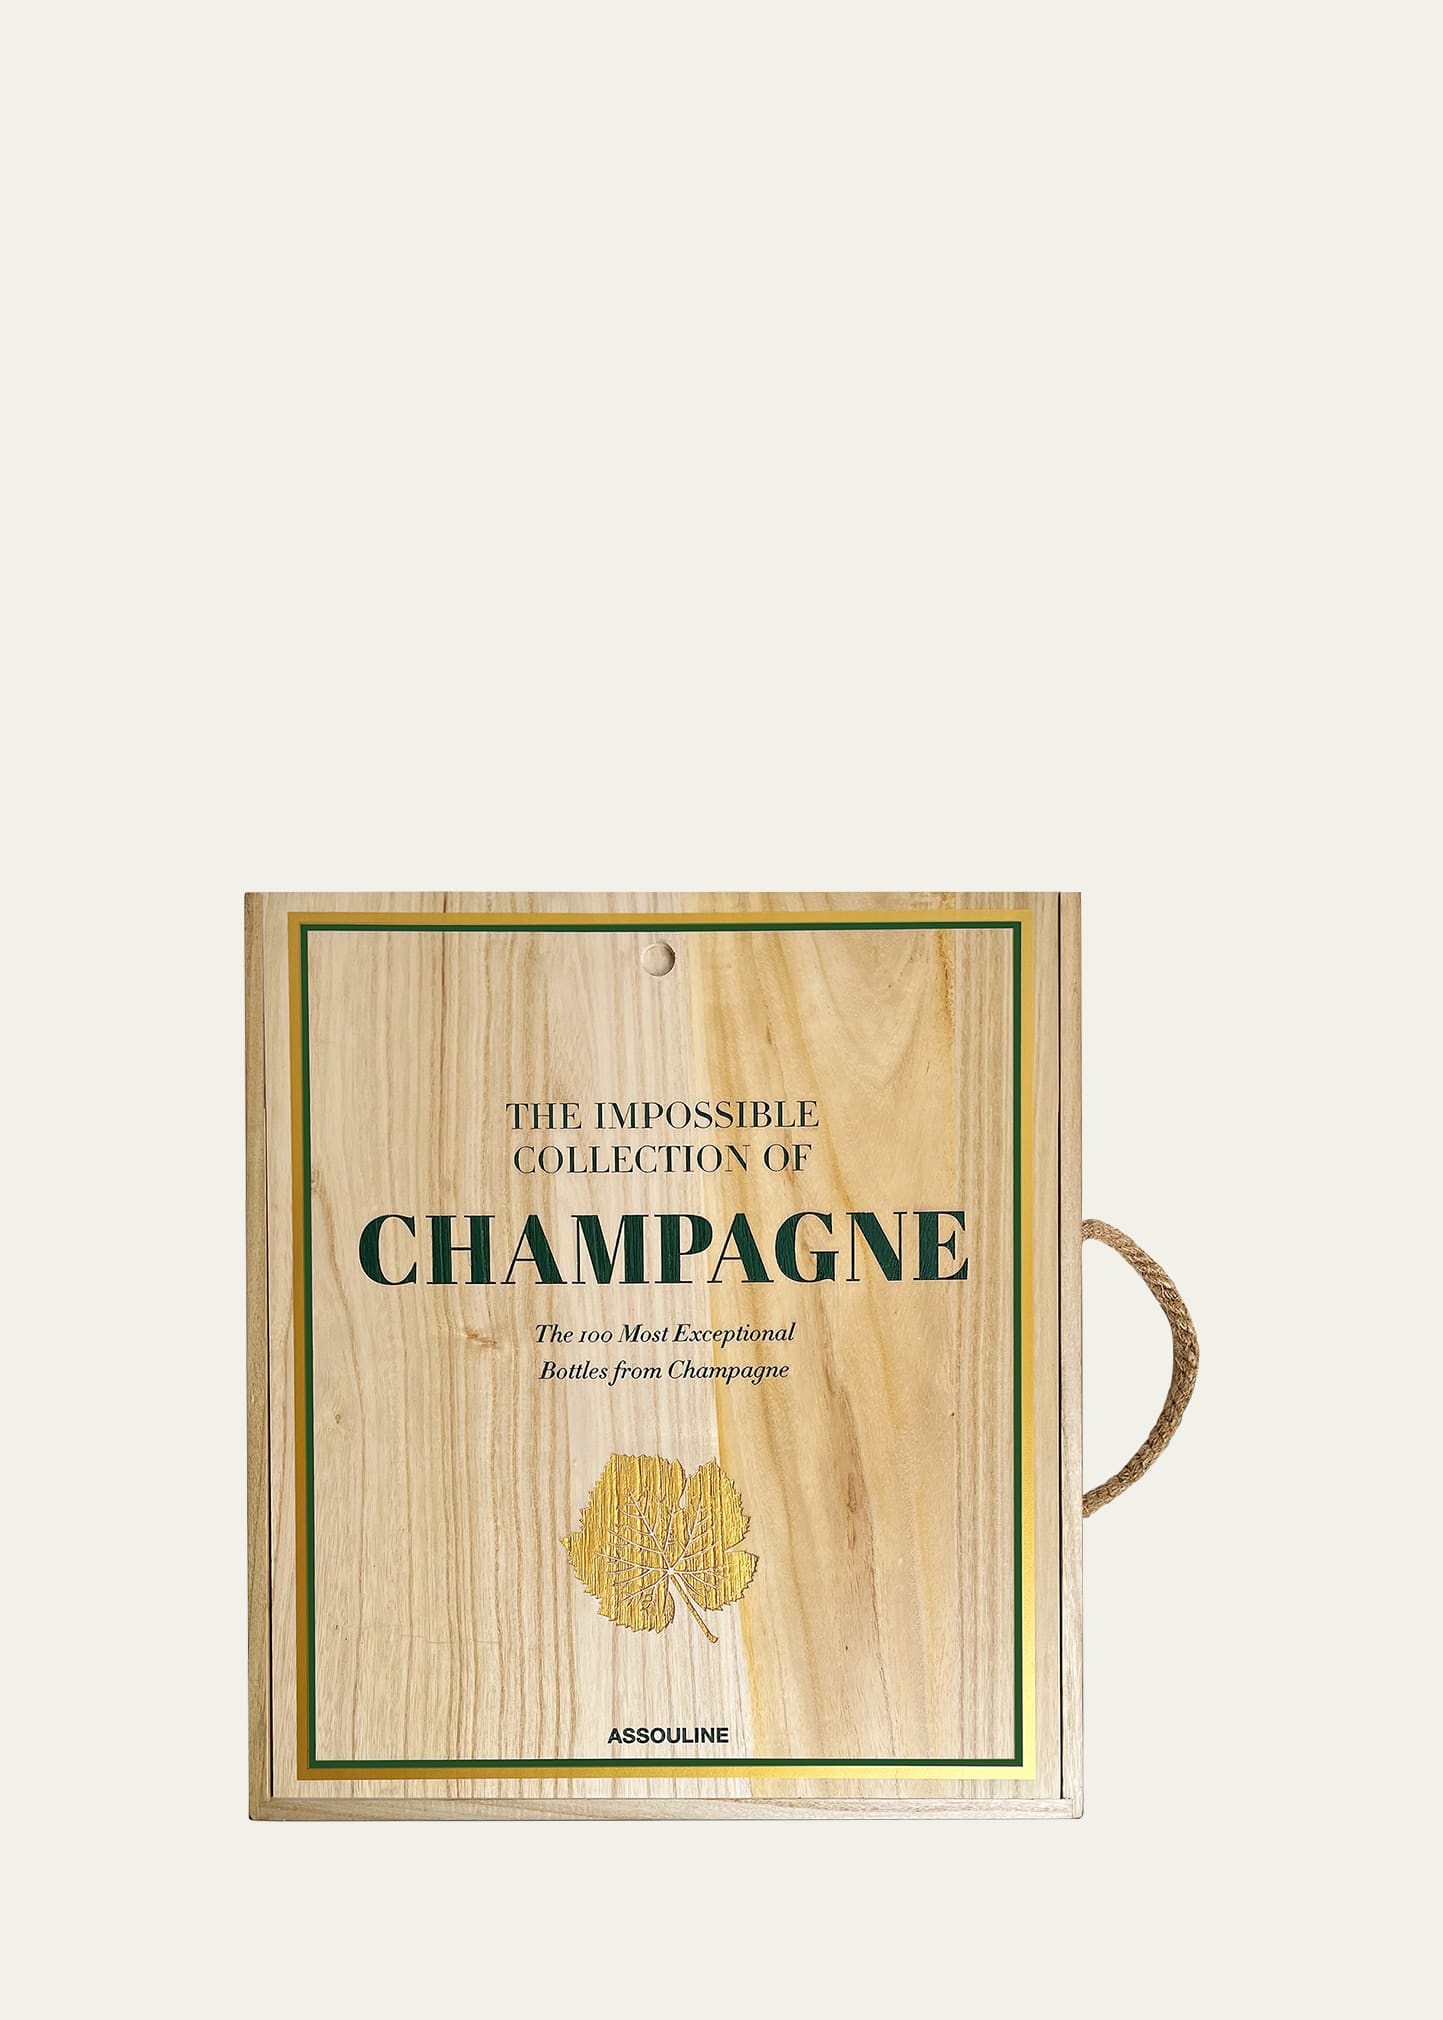 "The Impossible Collection of Champagne: The 100 Most Exceptional Bottles from Champagne" Book by Enrico Bernardo